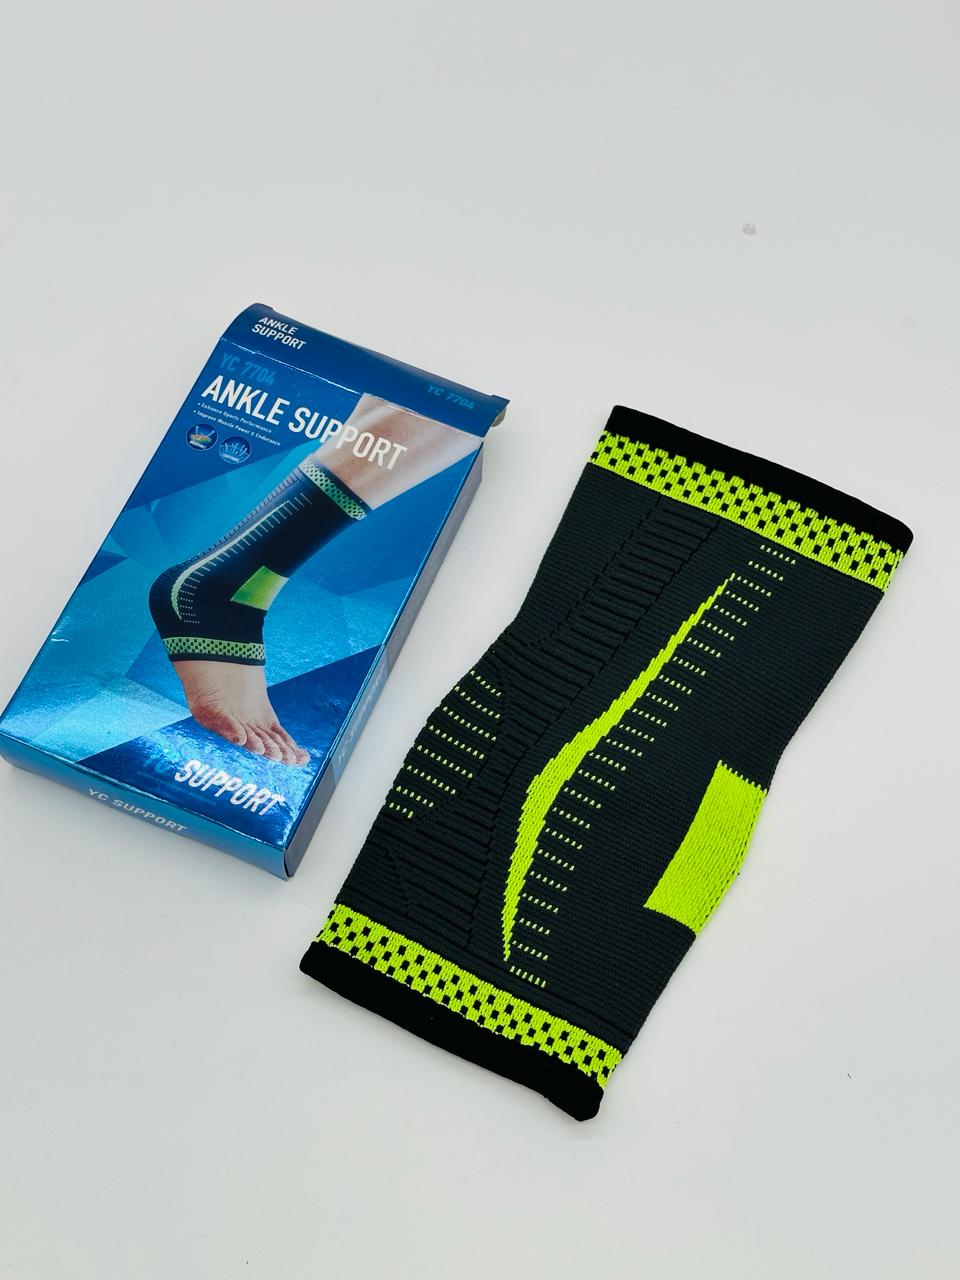 ANKLE SUPPORT Pain Relief Gadget.